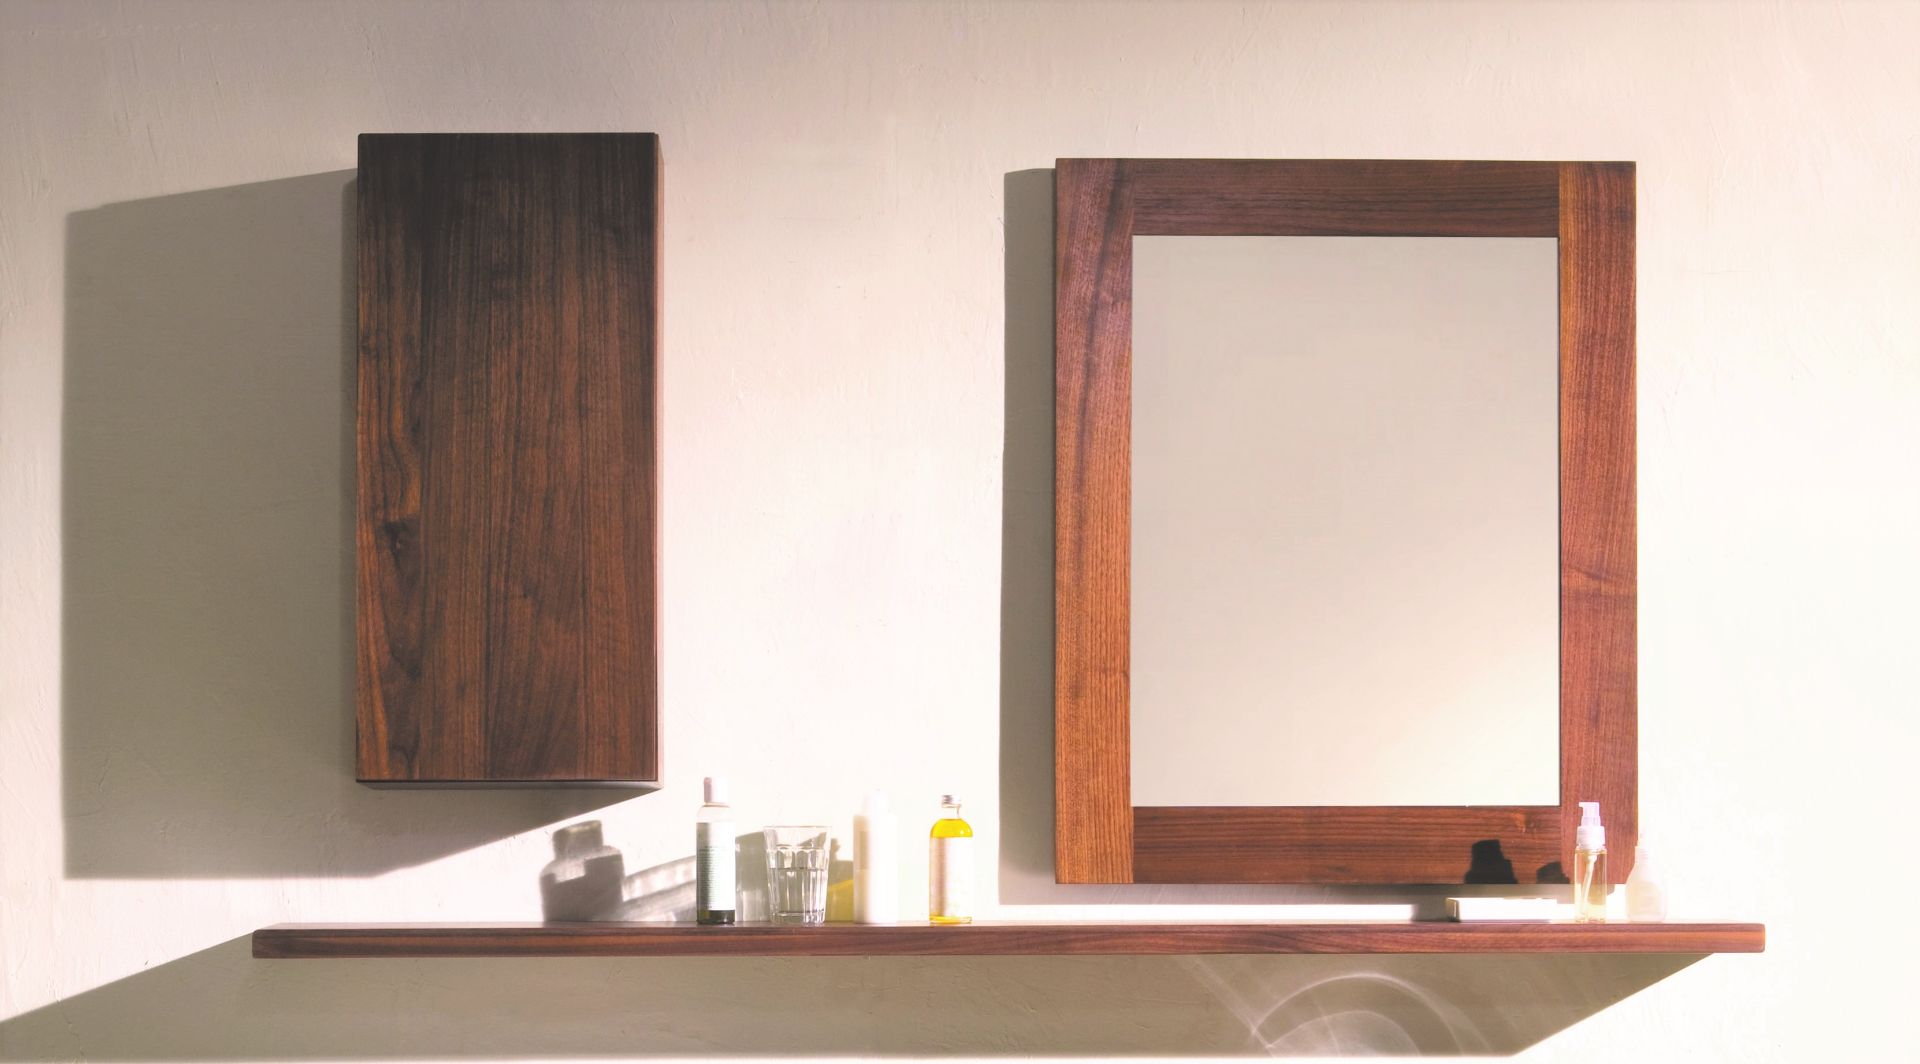 1 x Stonearth 300mm Wall Mounted Bathroom Storage Cabinet - American Solid Walnut - RRP £300 - Image 4 of 11